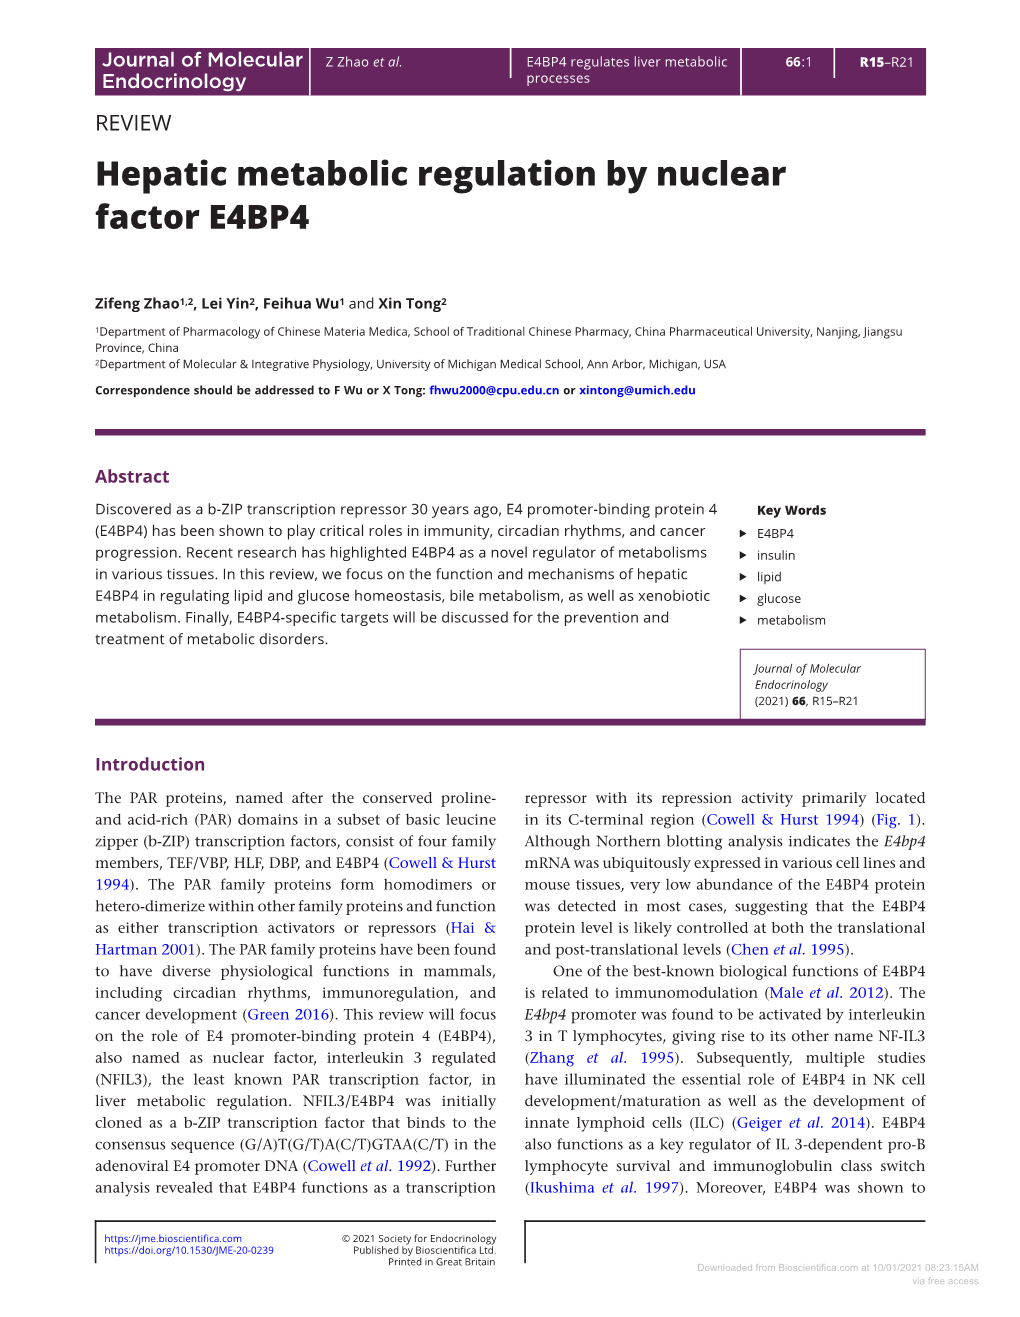 Hepatic Metabolic Regulation by Nuclear Factor E4BP4